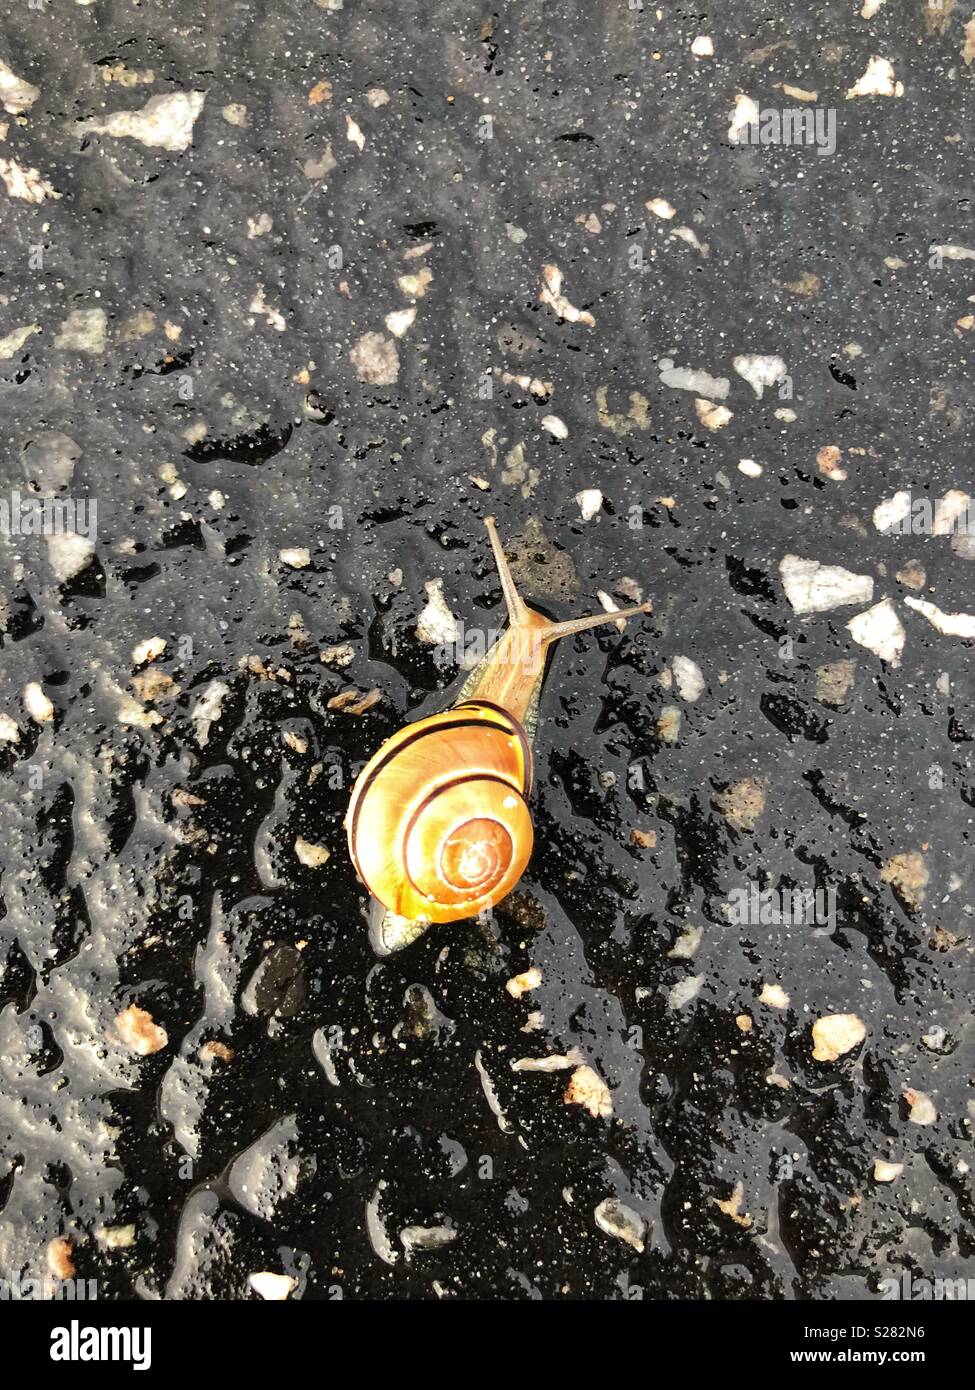 Snails everywhere, after the rain Stock Photo